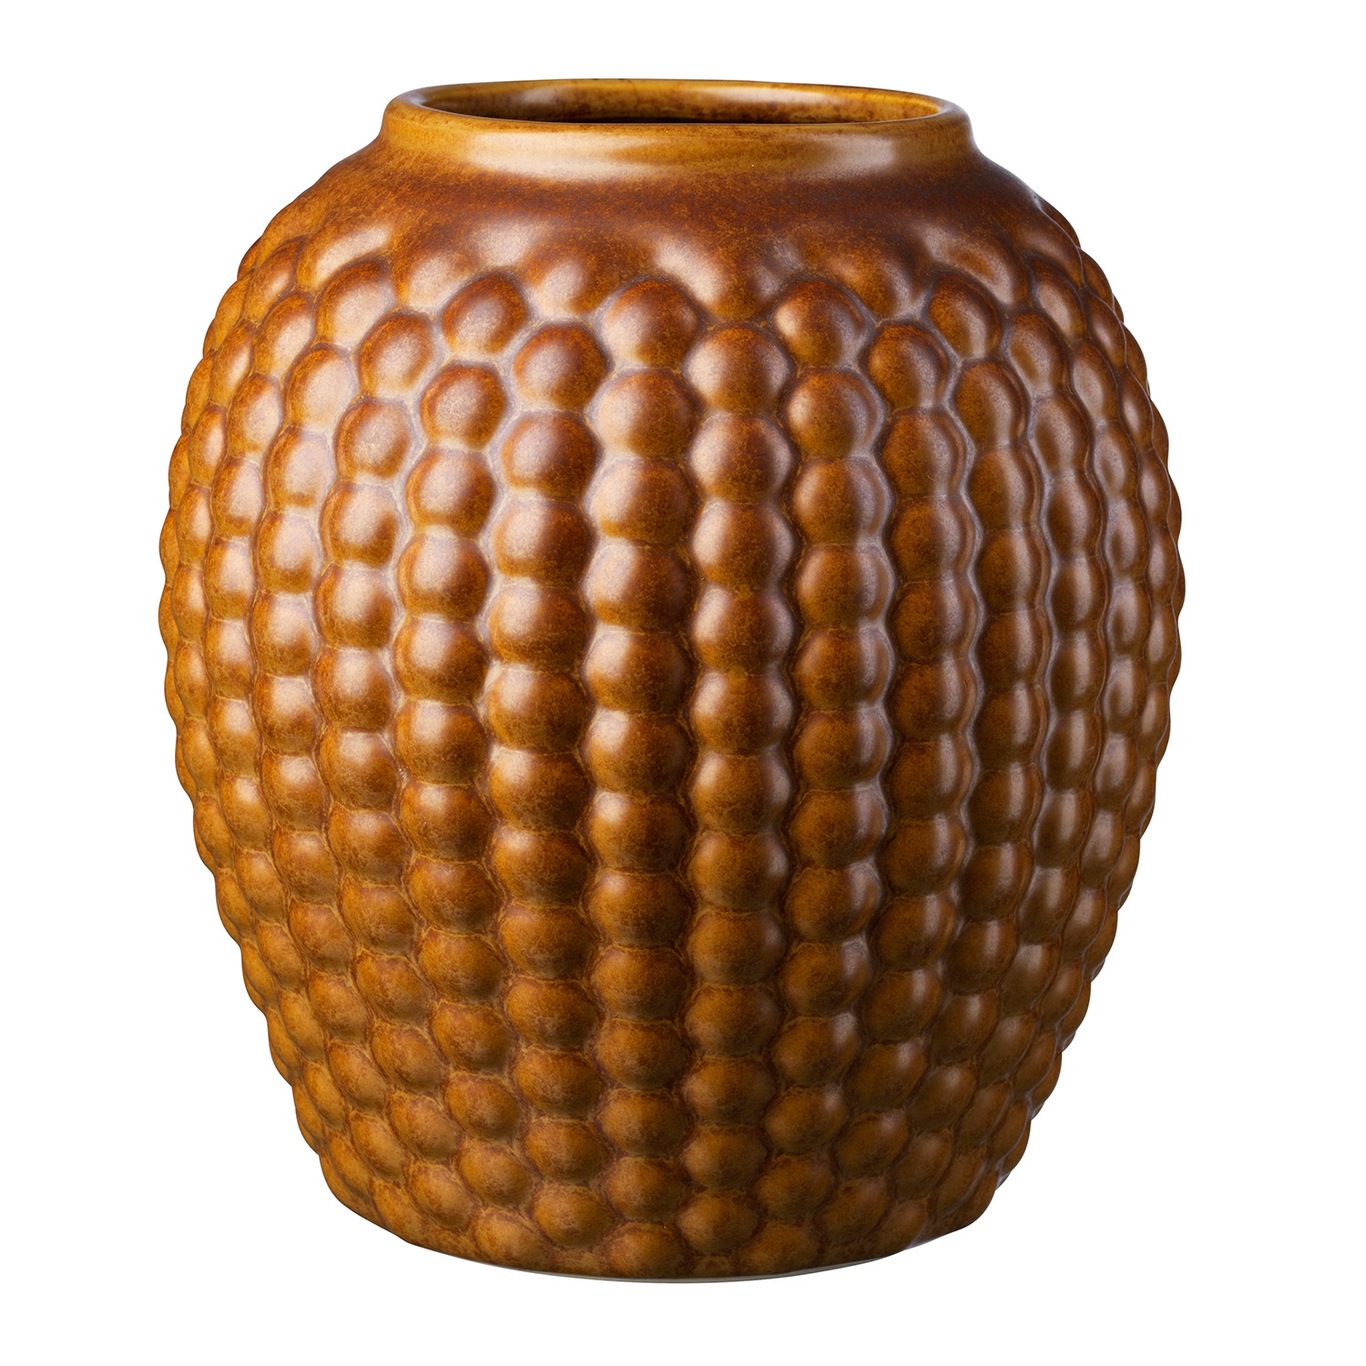 S7 Lupin Vase Bred S, Golden Brown